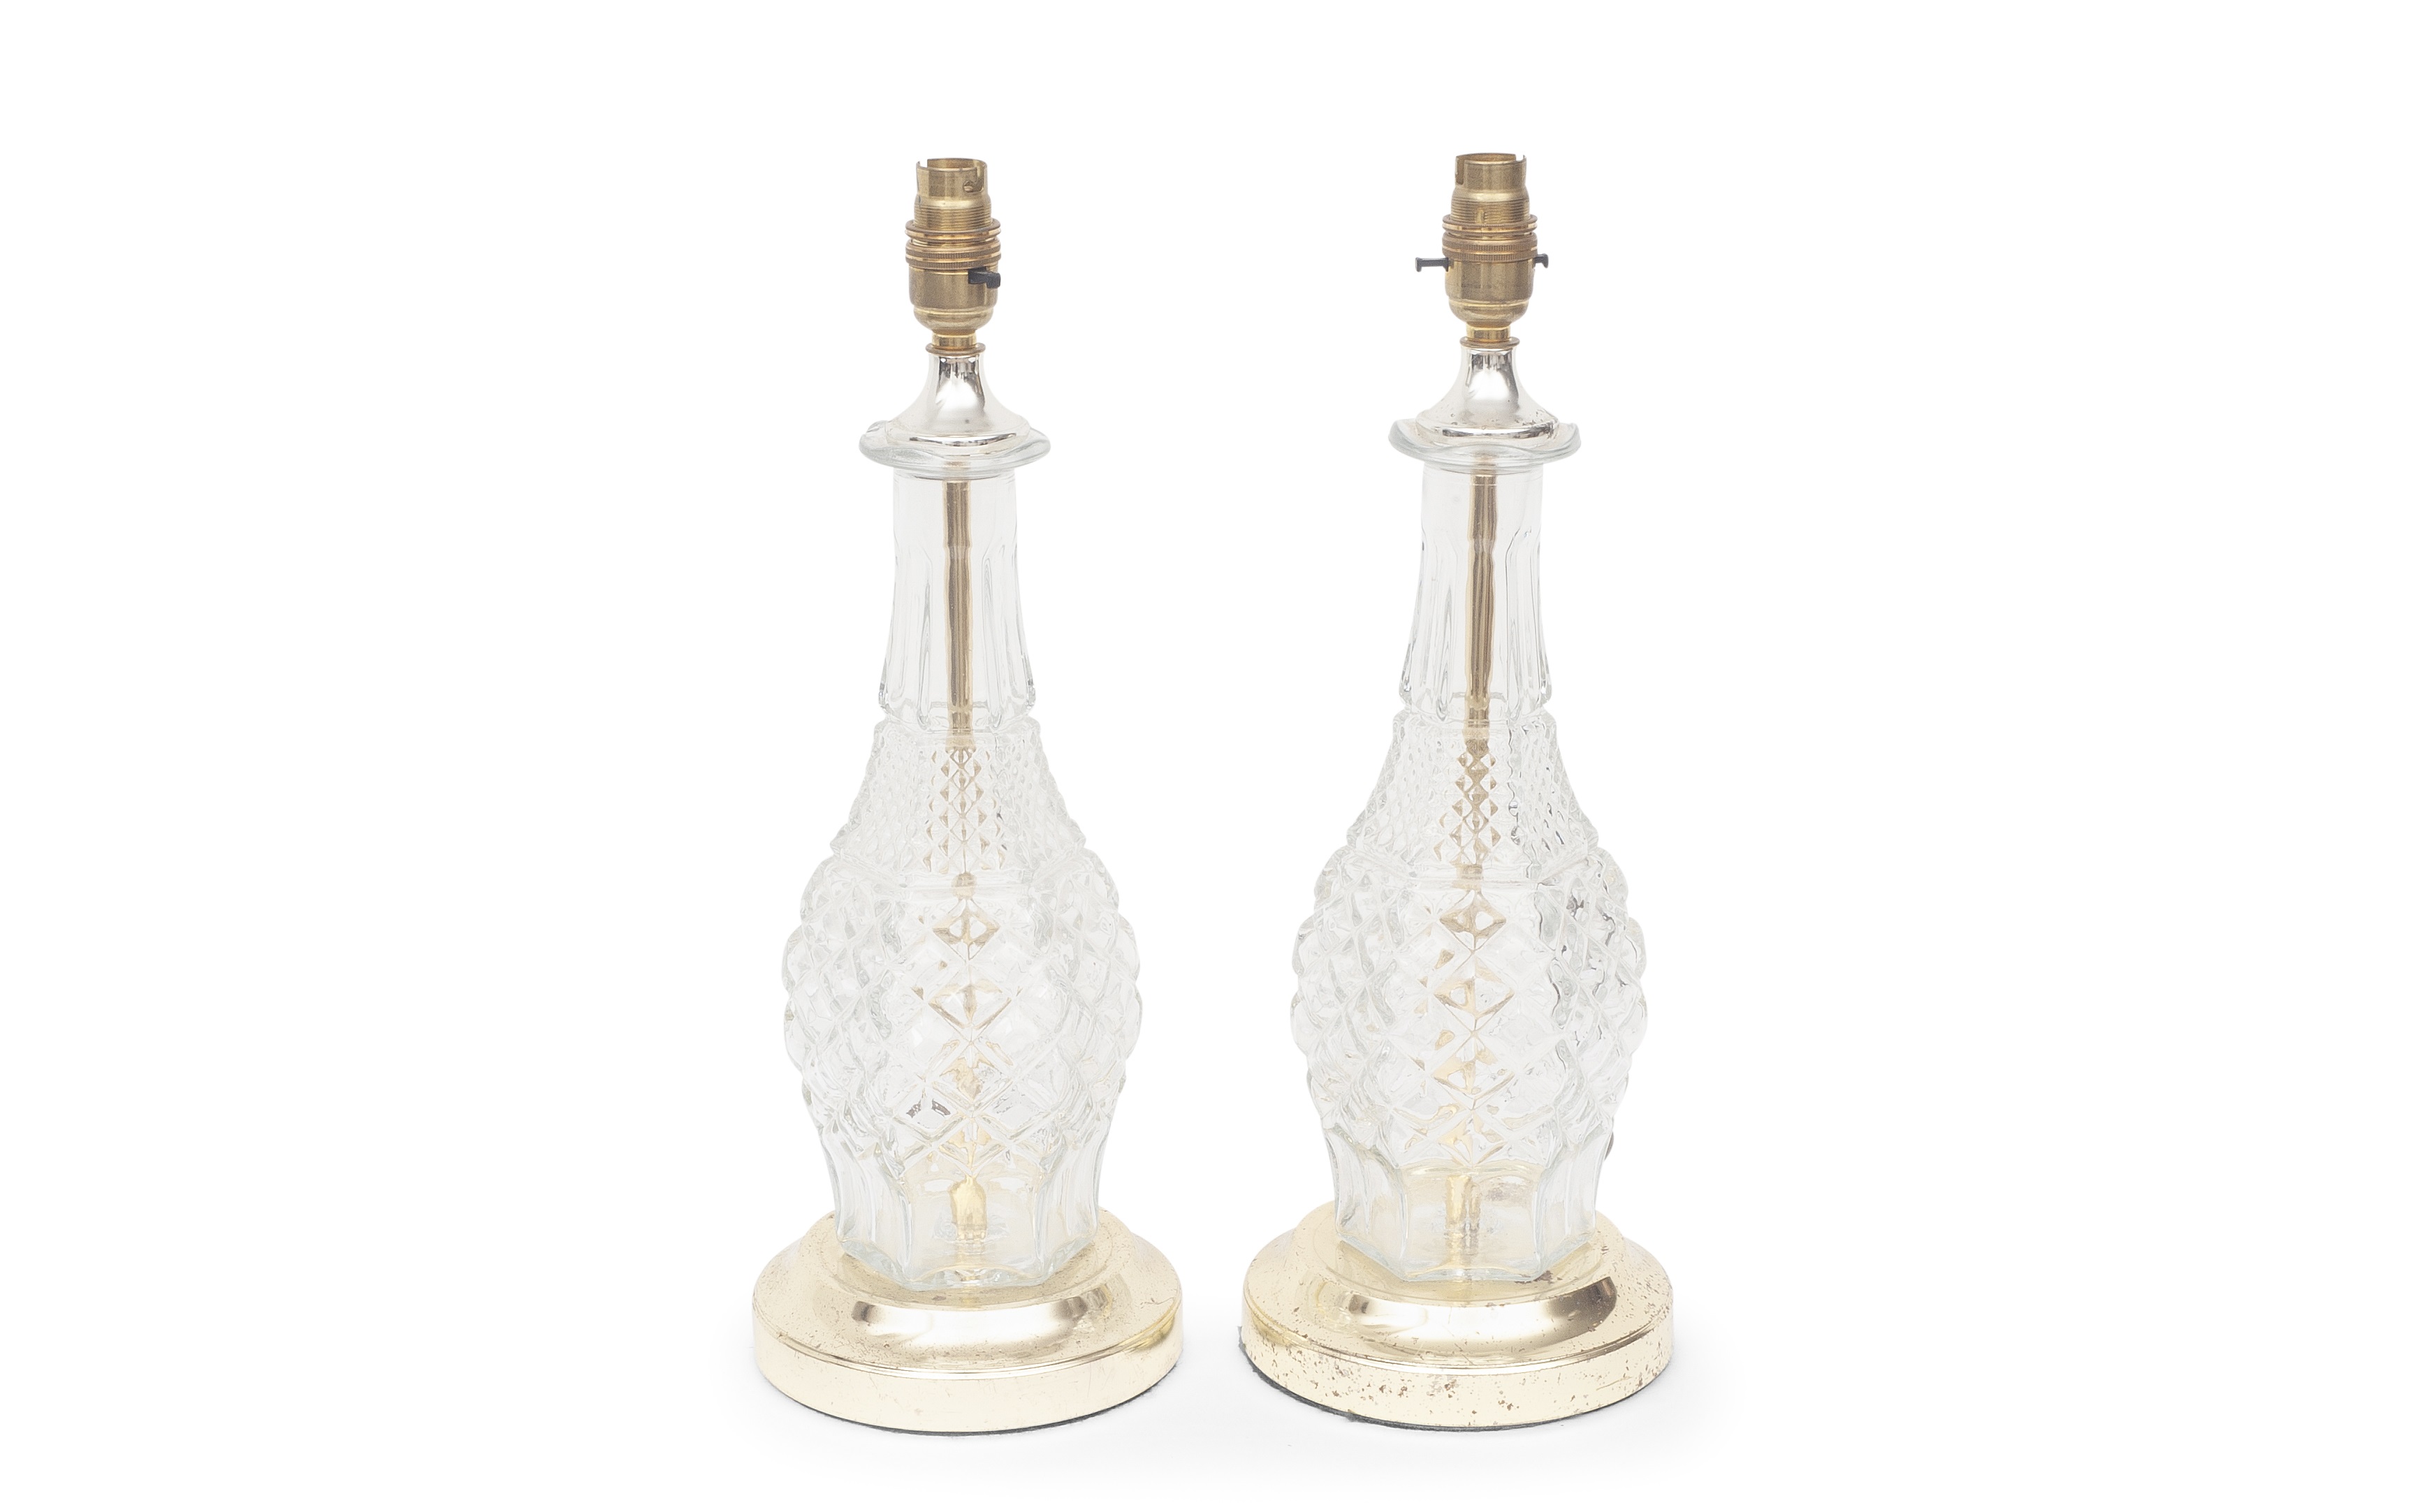 A PAIR OF FRENCH MOULDED GLASS AND PARCEL GILT LAMP BASES